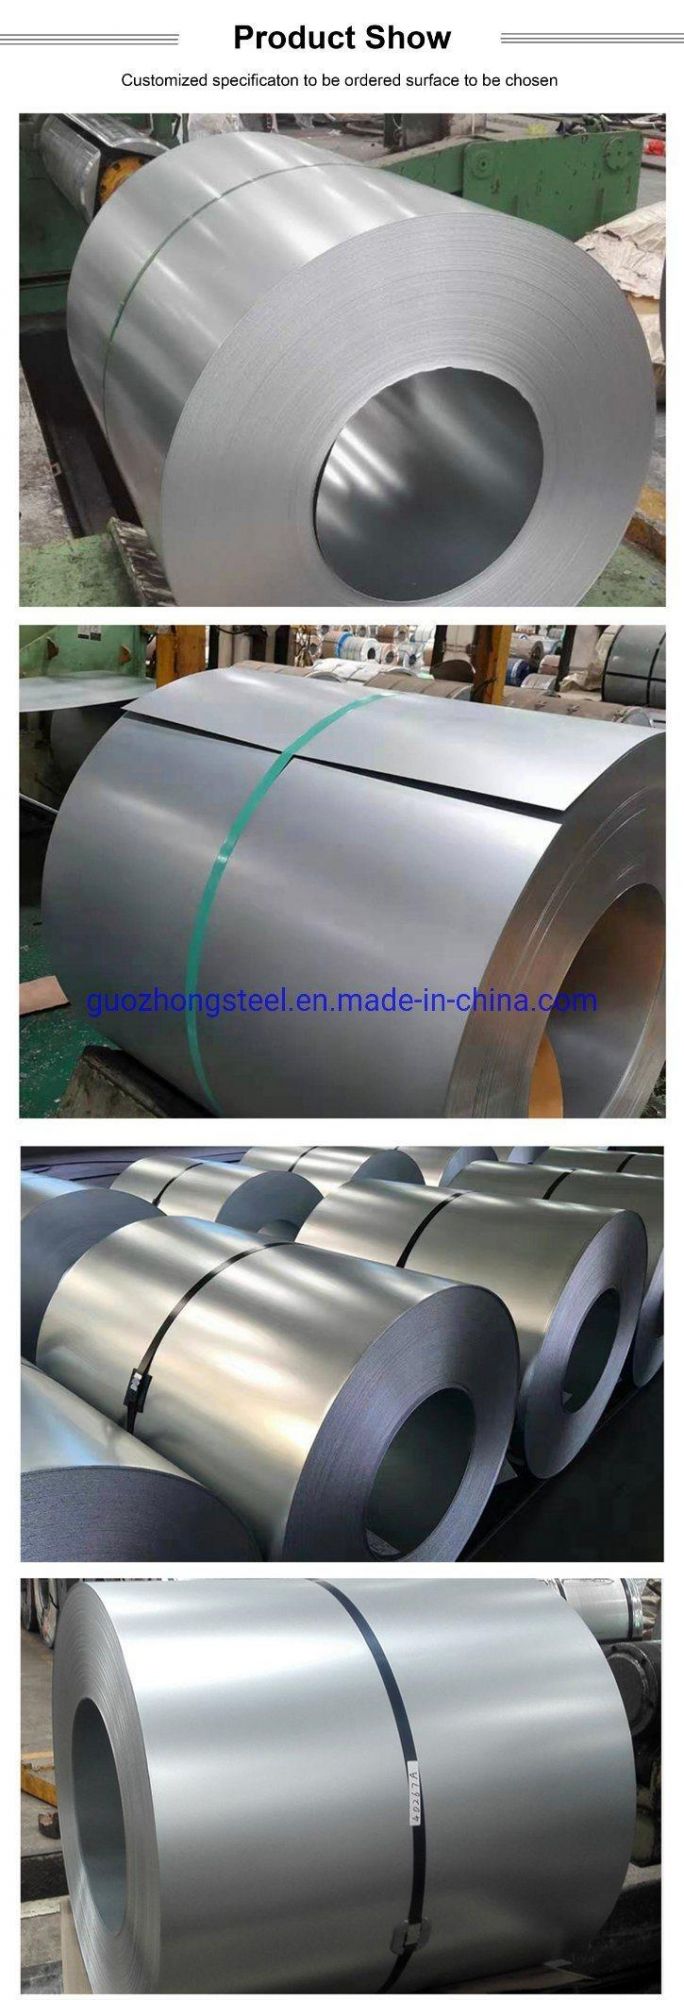 Gi Coil Q235A ASTM A283m Cold Rolled Galvanized Steel Coil